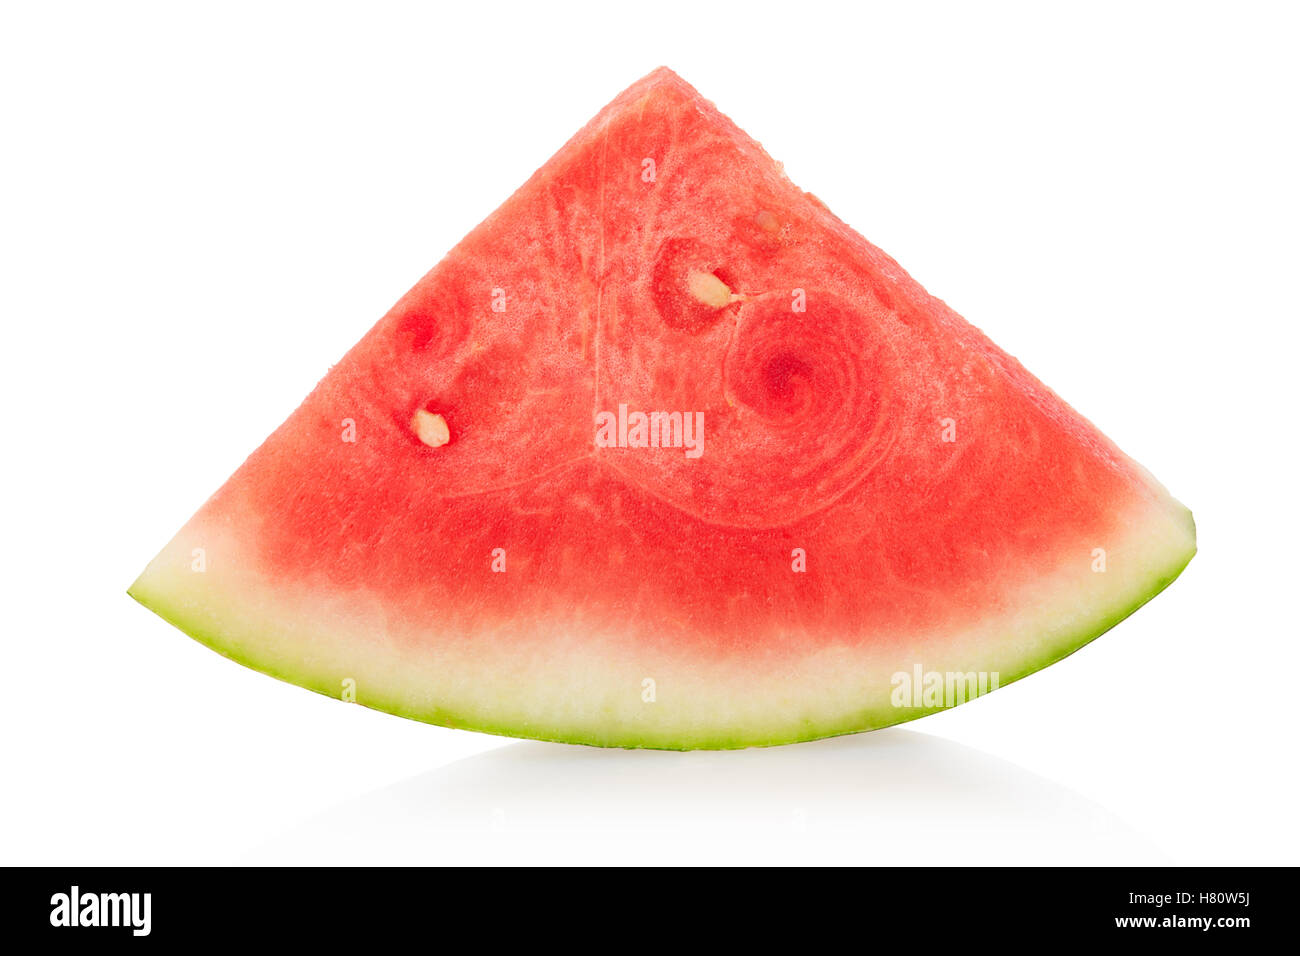 Watermelon triangular slice on white, clipping path included Stock Photo